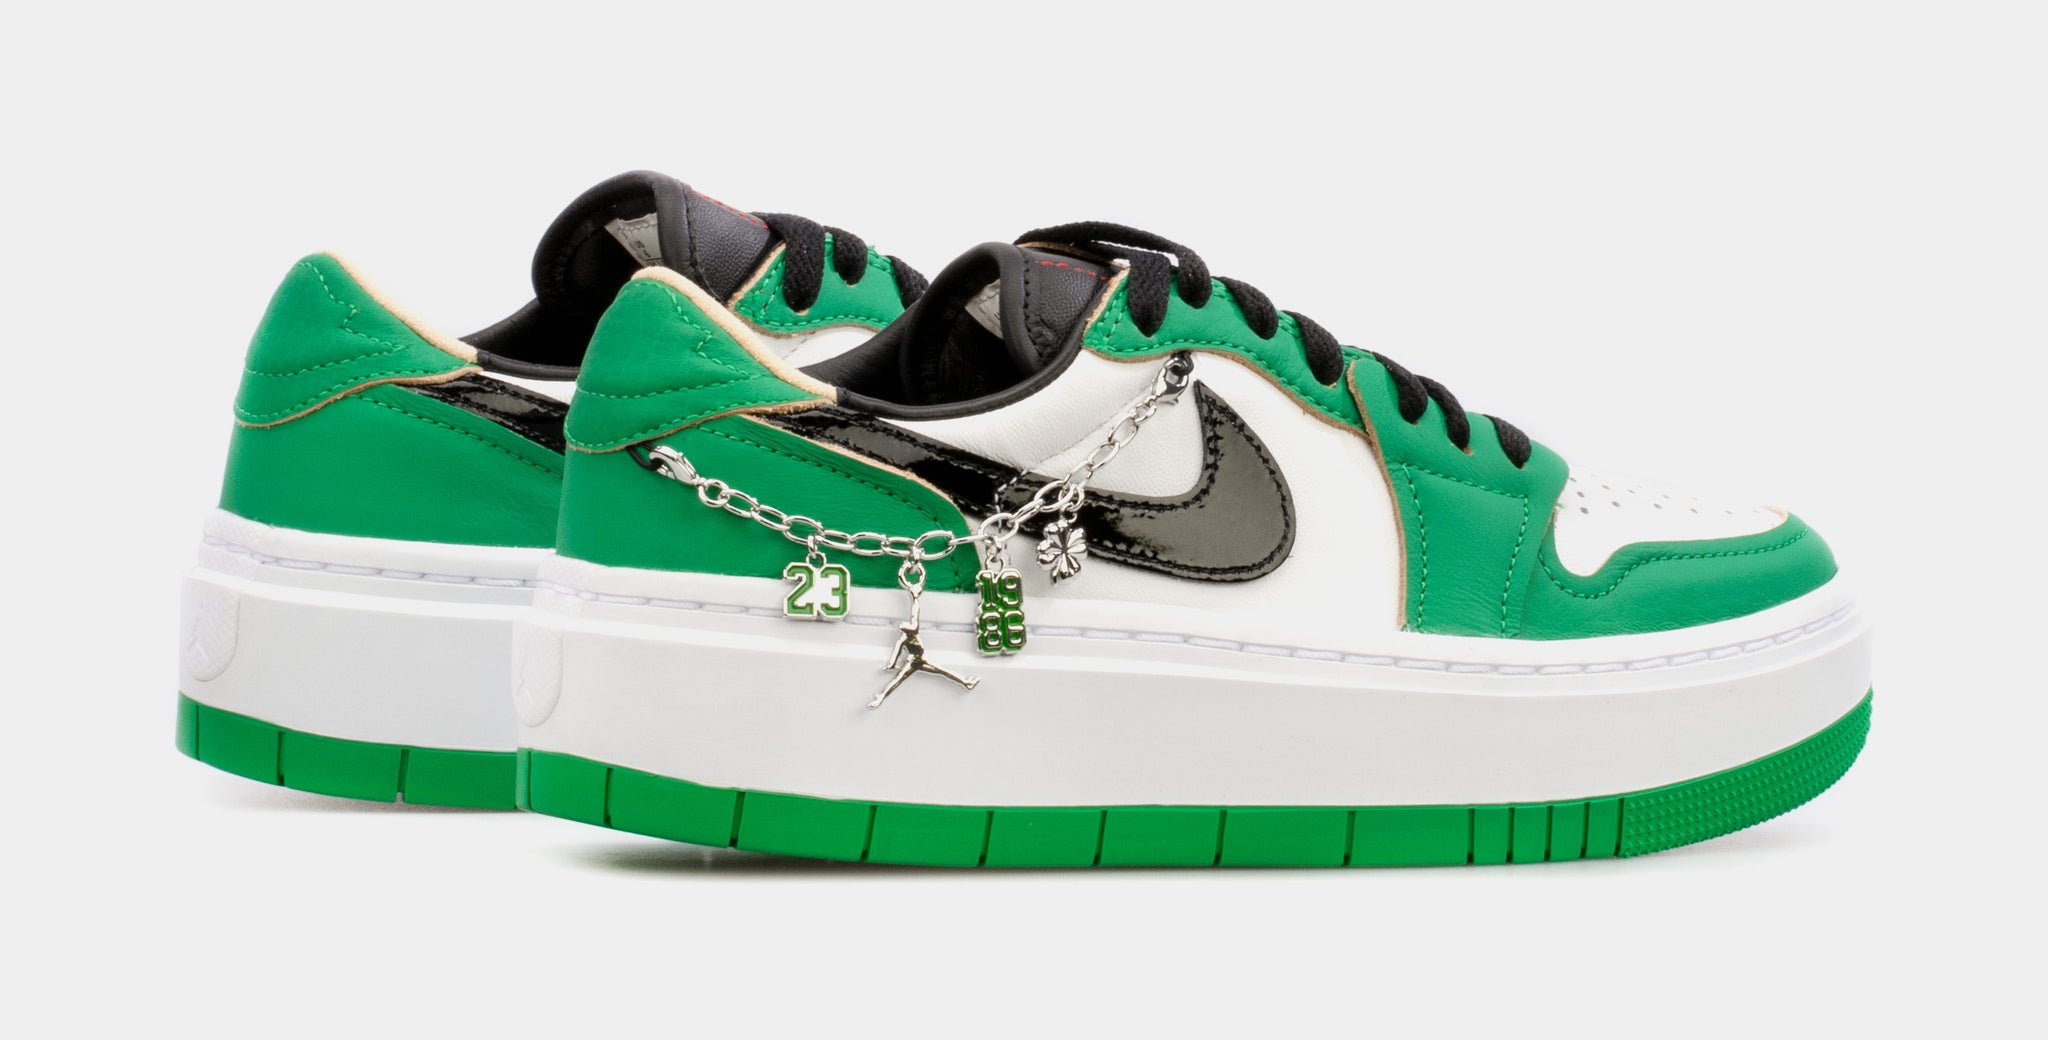 Air Jordan 1 Elevate Low Lucky Green Womens Lifestyle Shoes (Green/White)